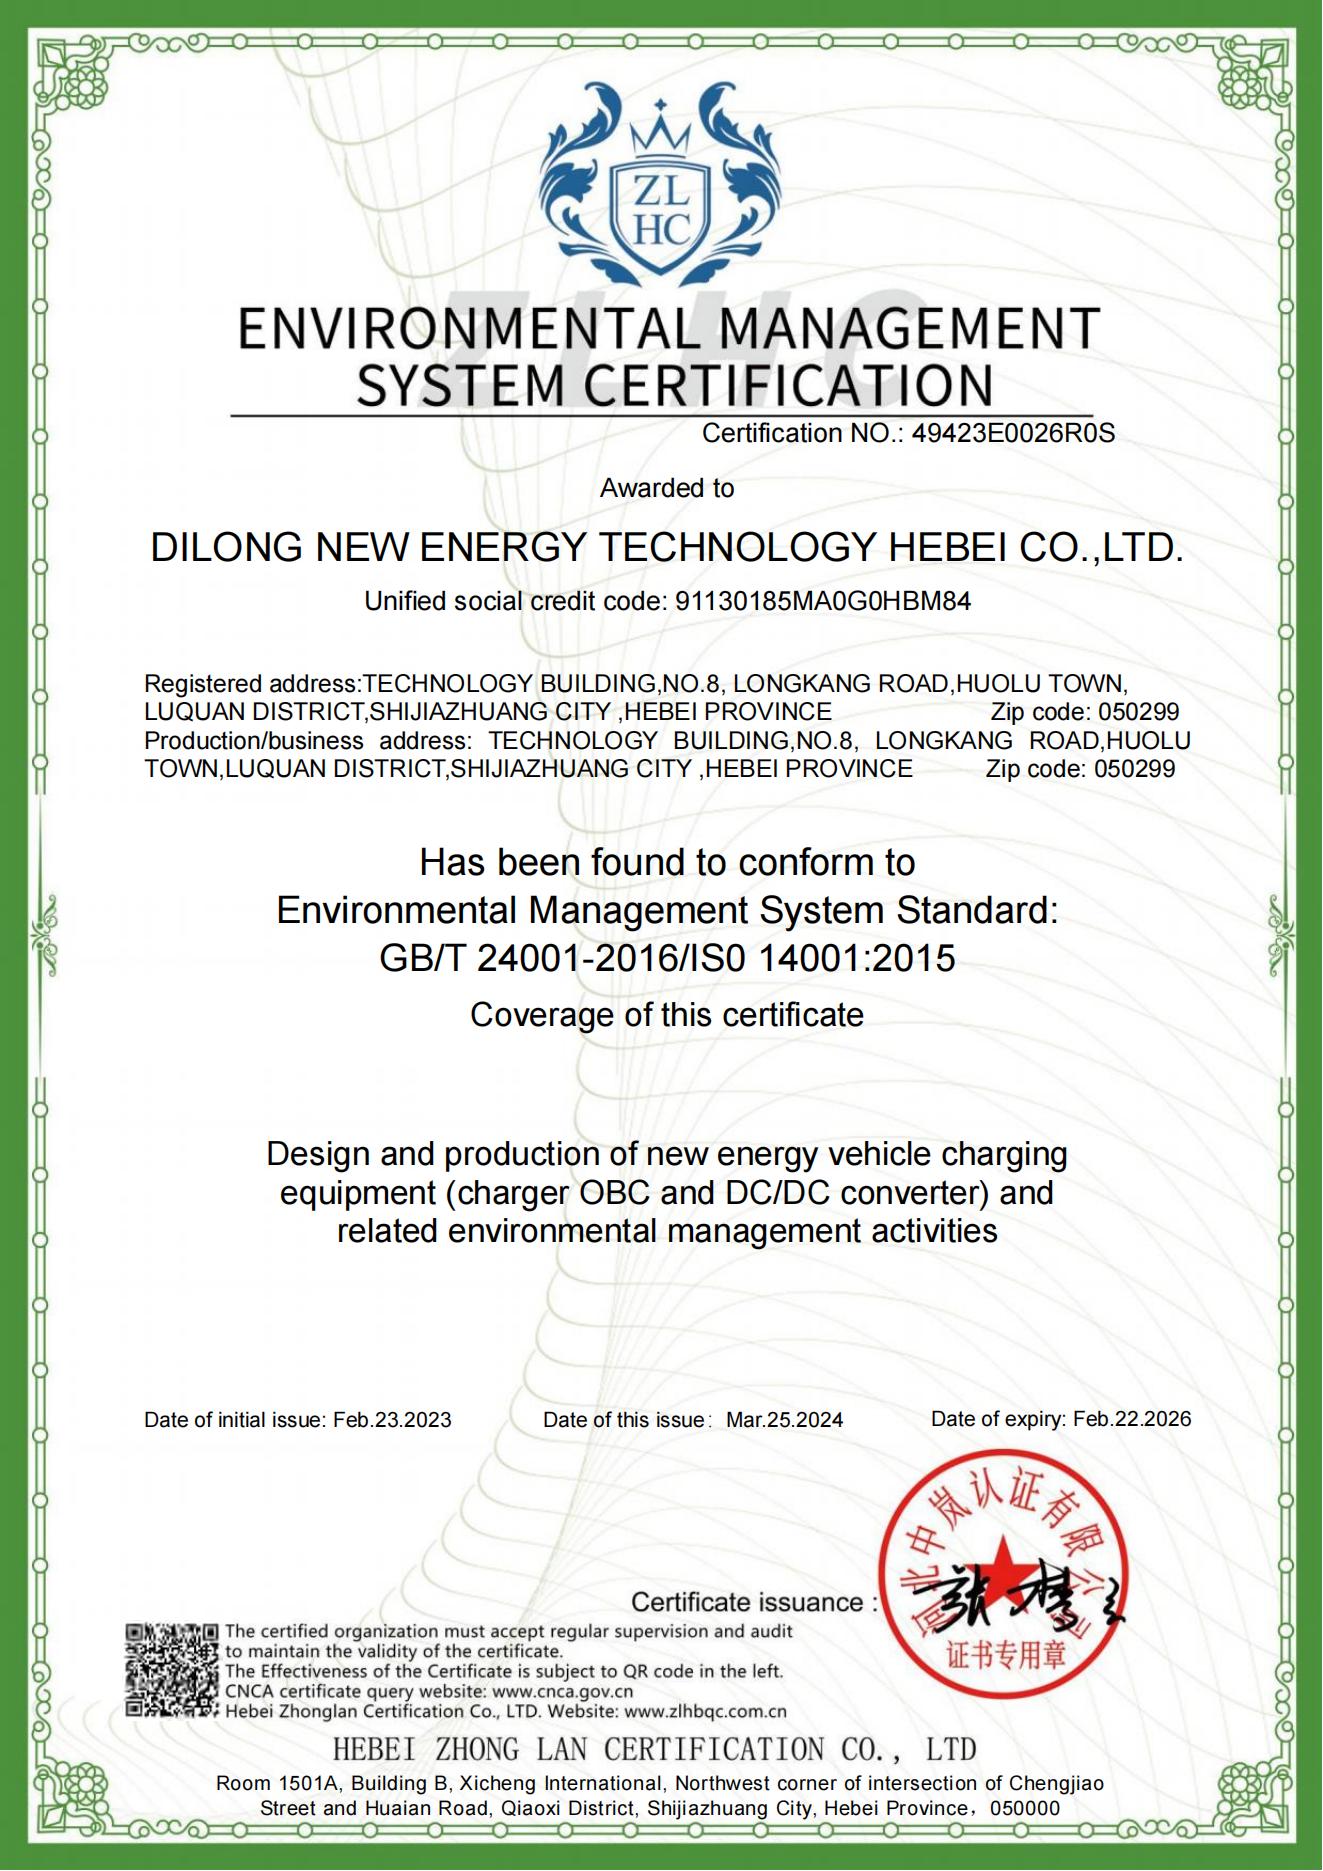 “IS014001:2015 environmental management system